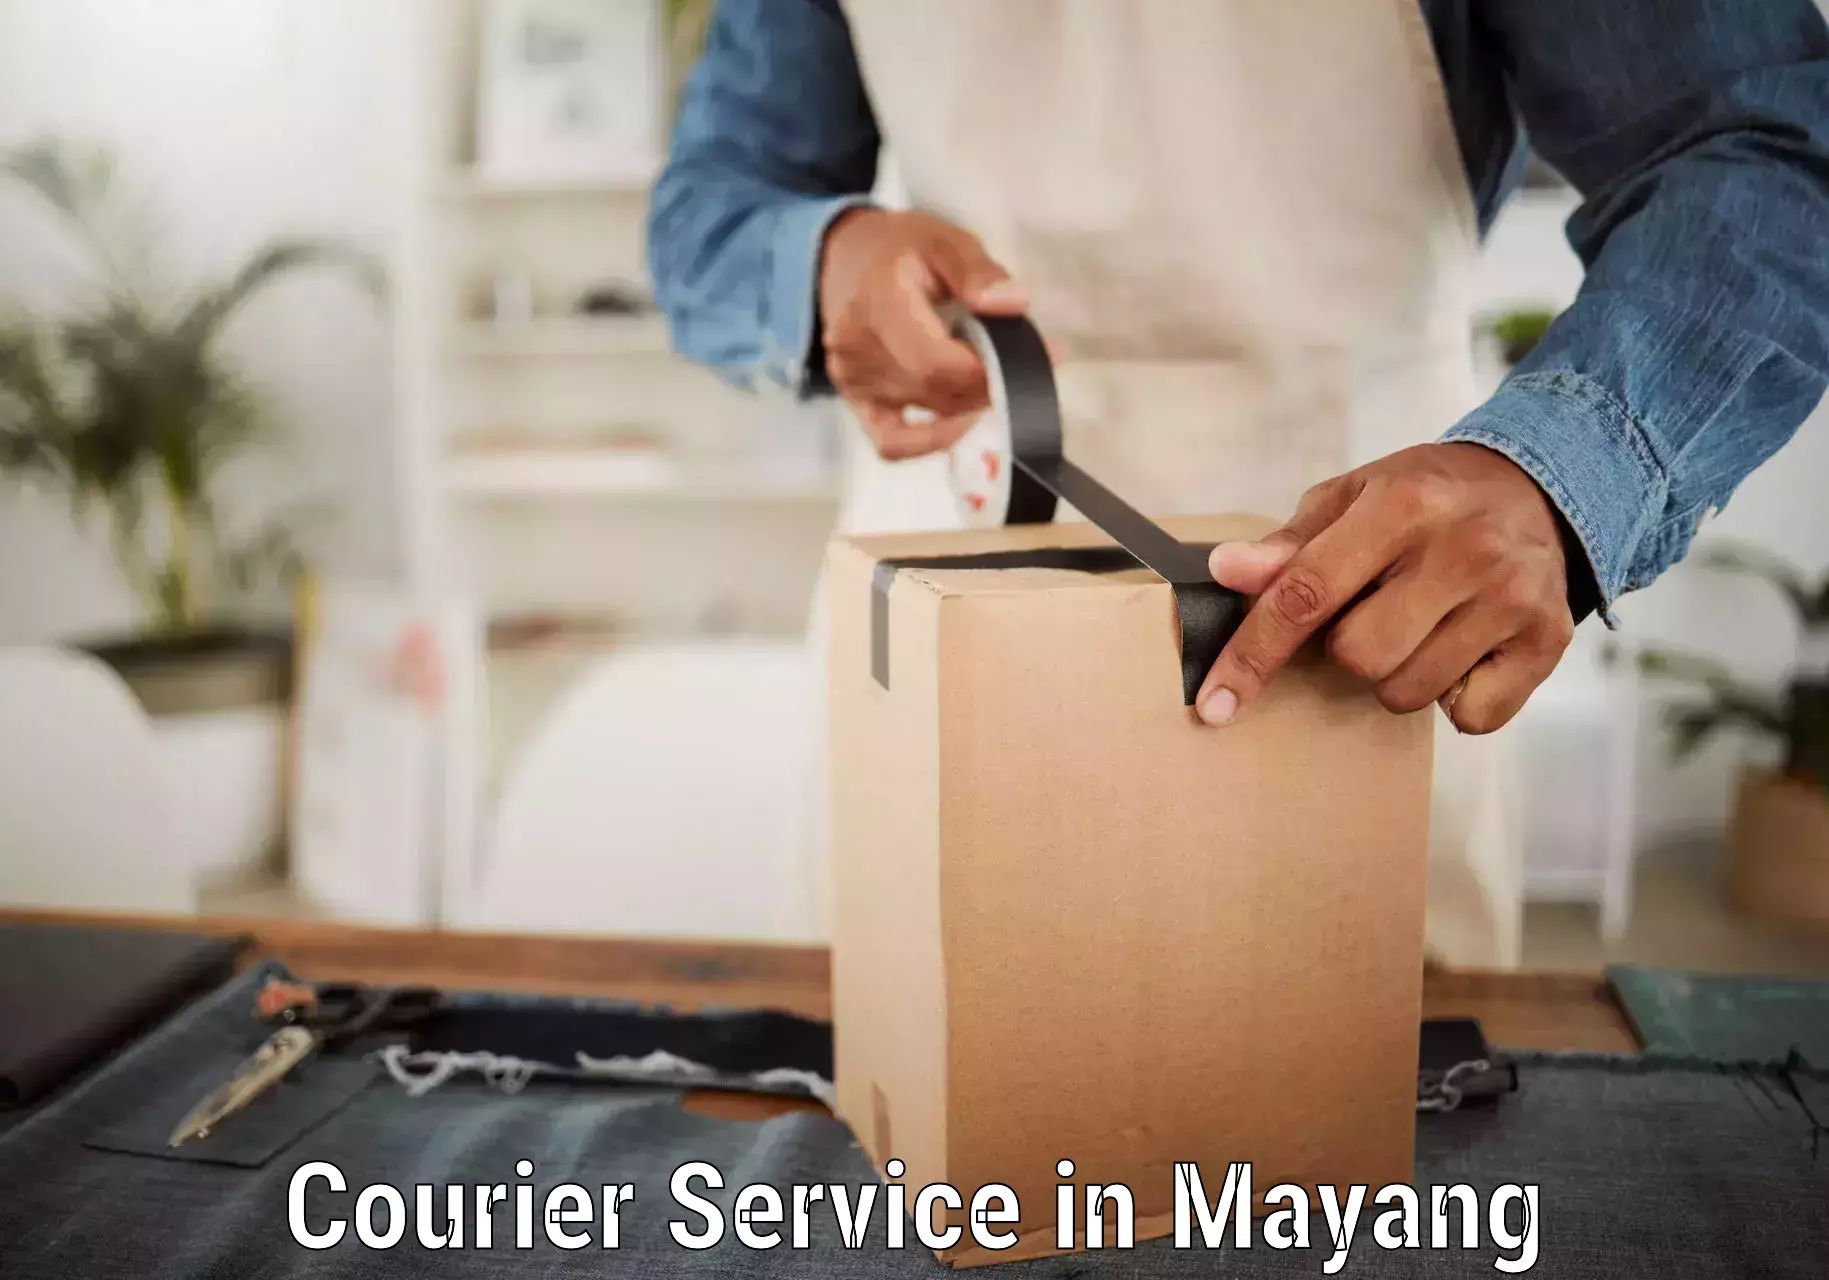 Specialized shipment handling in Mayang